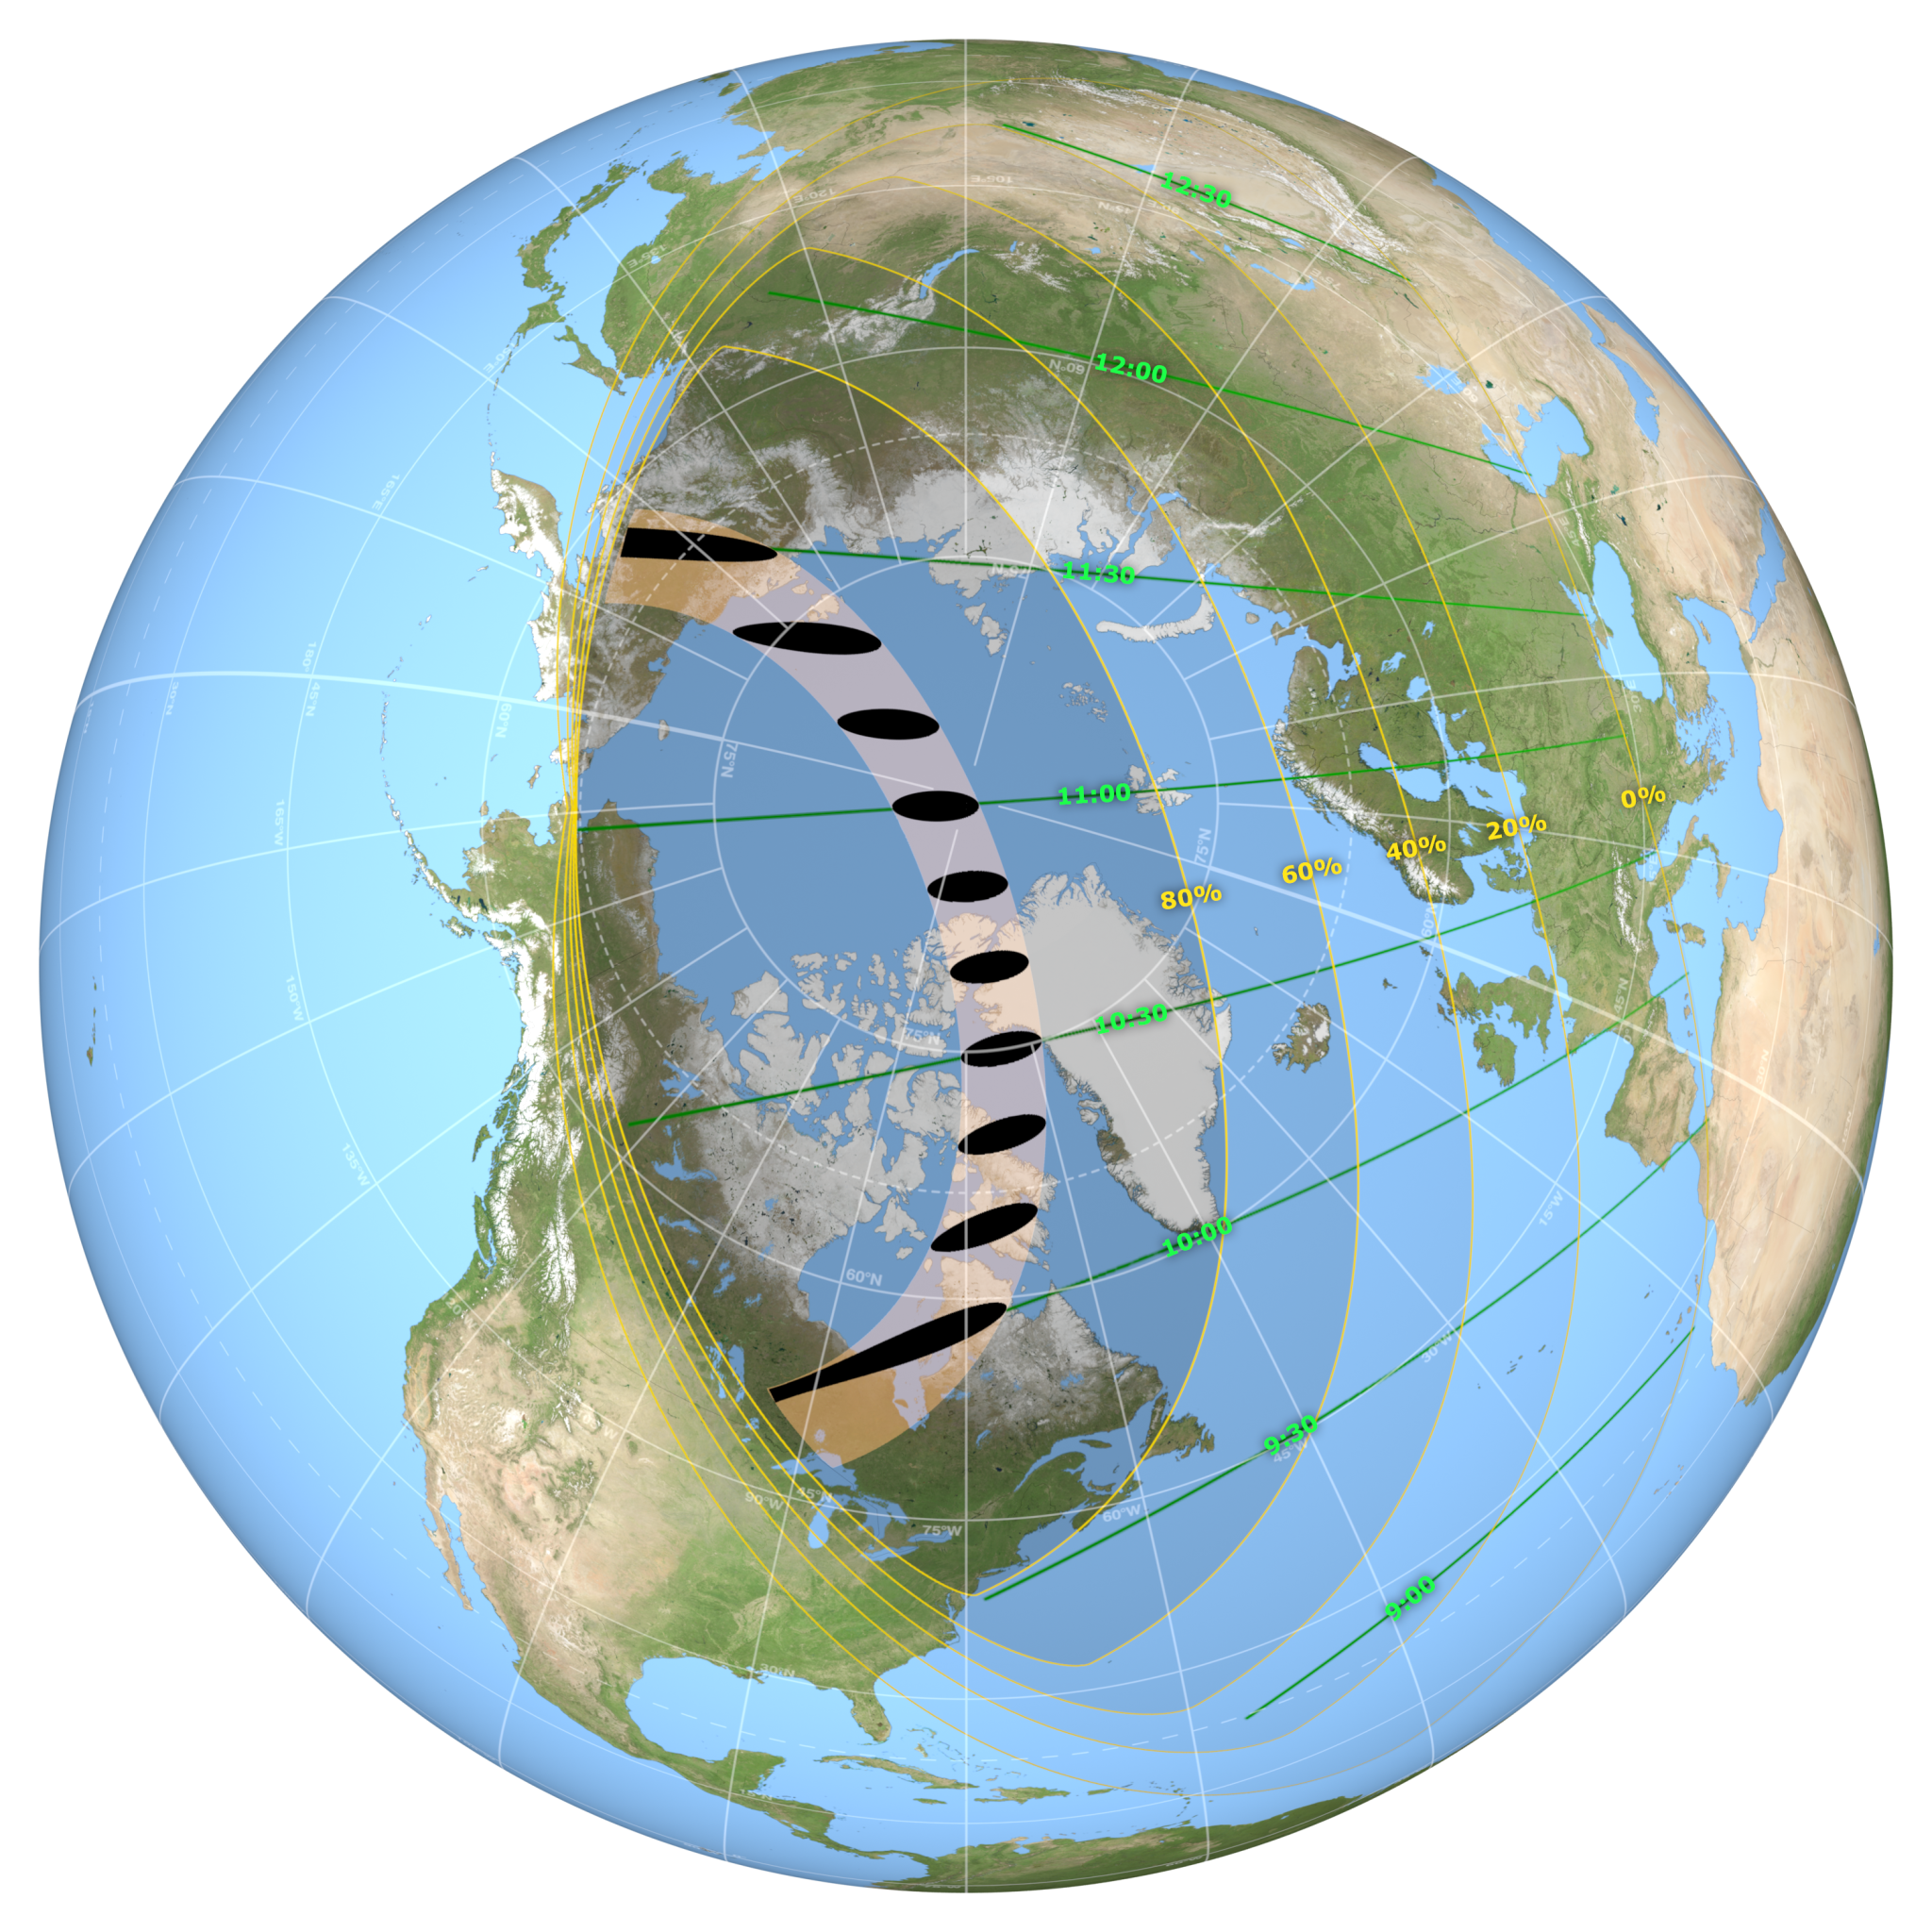 An illustration of Earth with the shadow of the eclipse path. The shadow is split into how close to full annularity the eclipse reaches, including 80%, 60%, 40%, 20%, and 0%. The shadow crosses North America, Africa, Europe, and Asia.